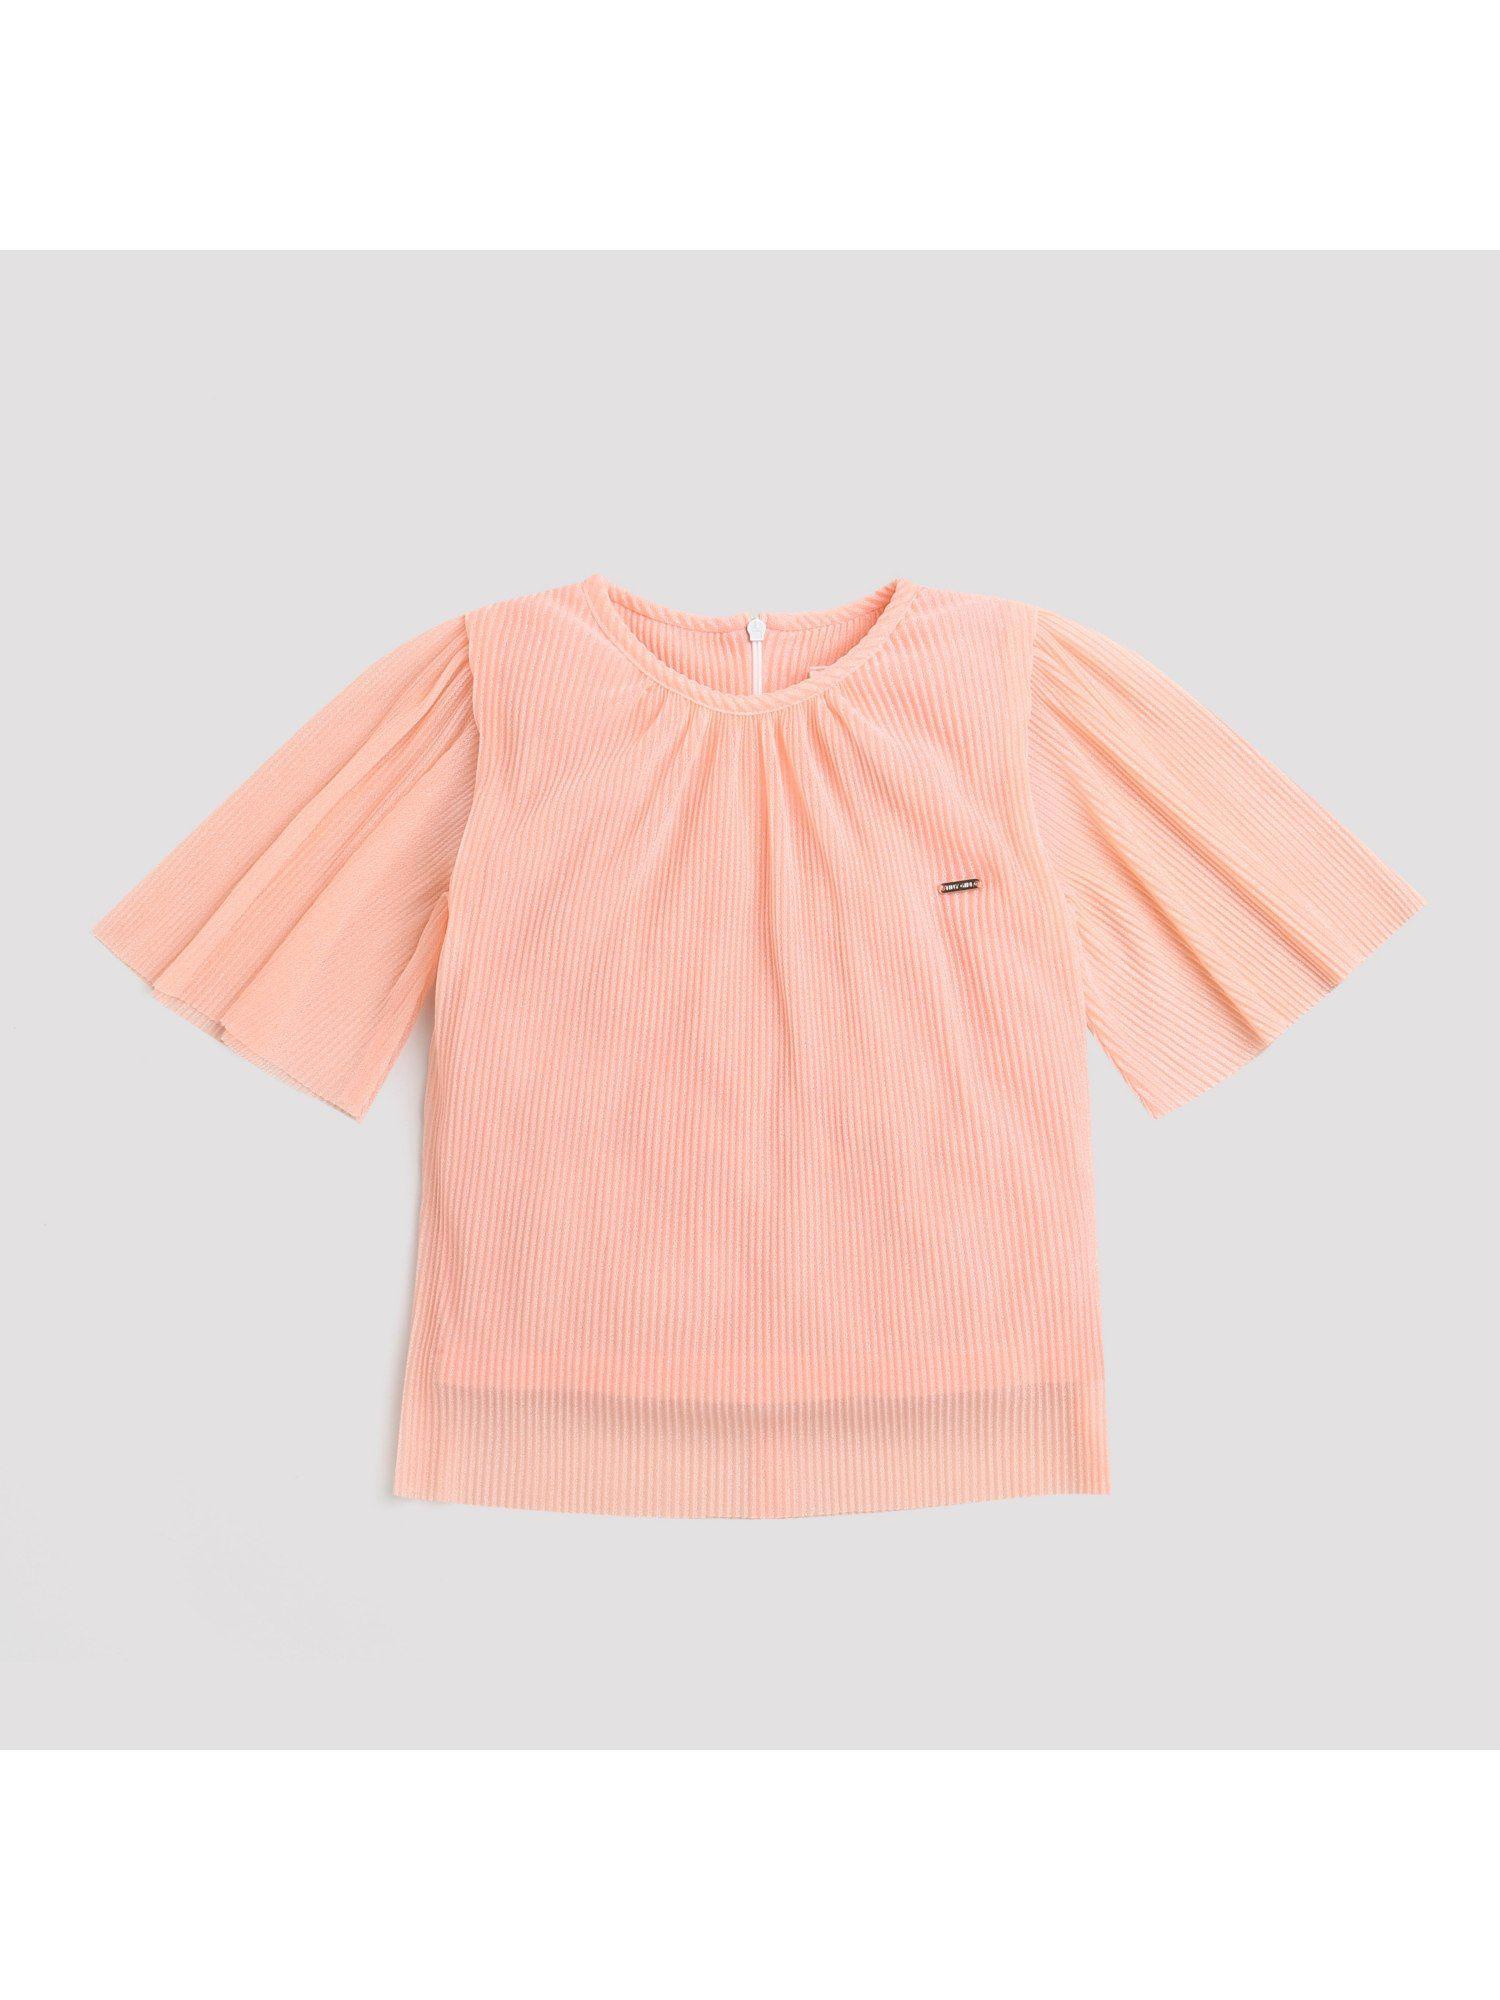 chiffon-pleated-with-sparkle-top---peach